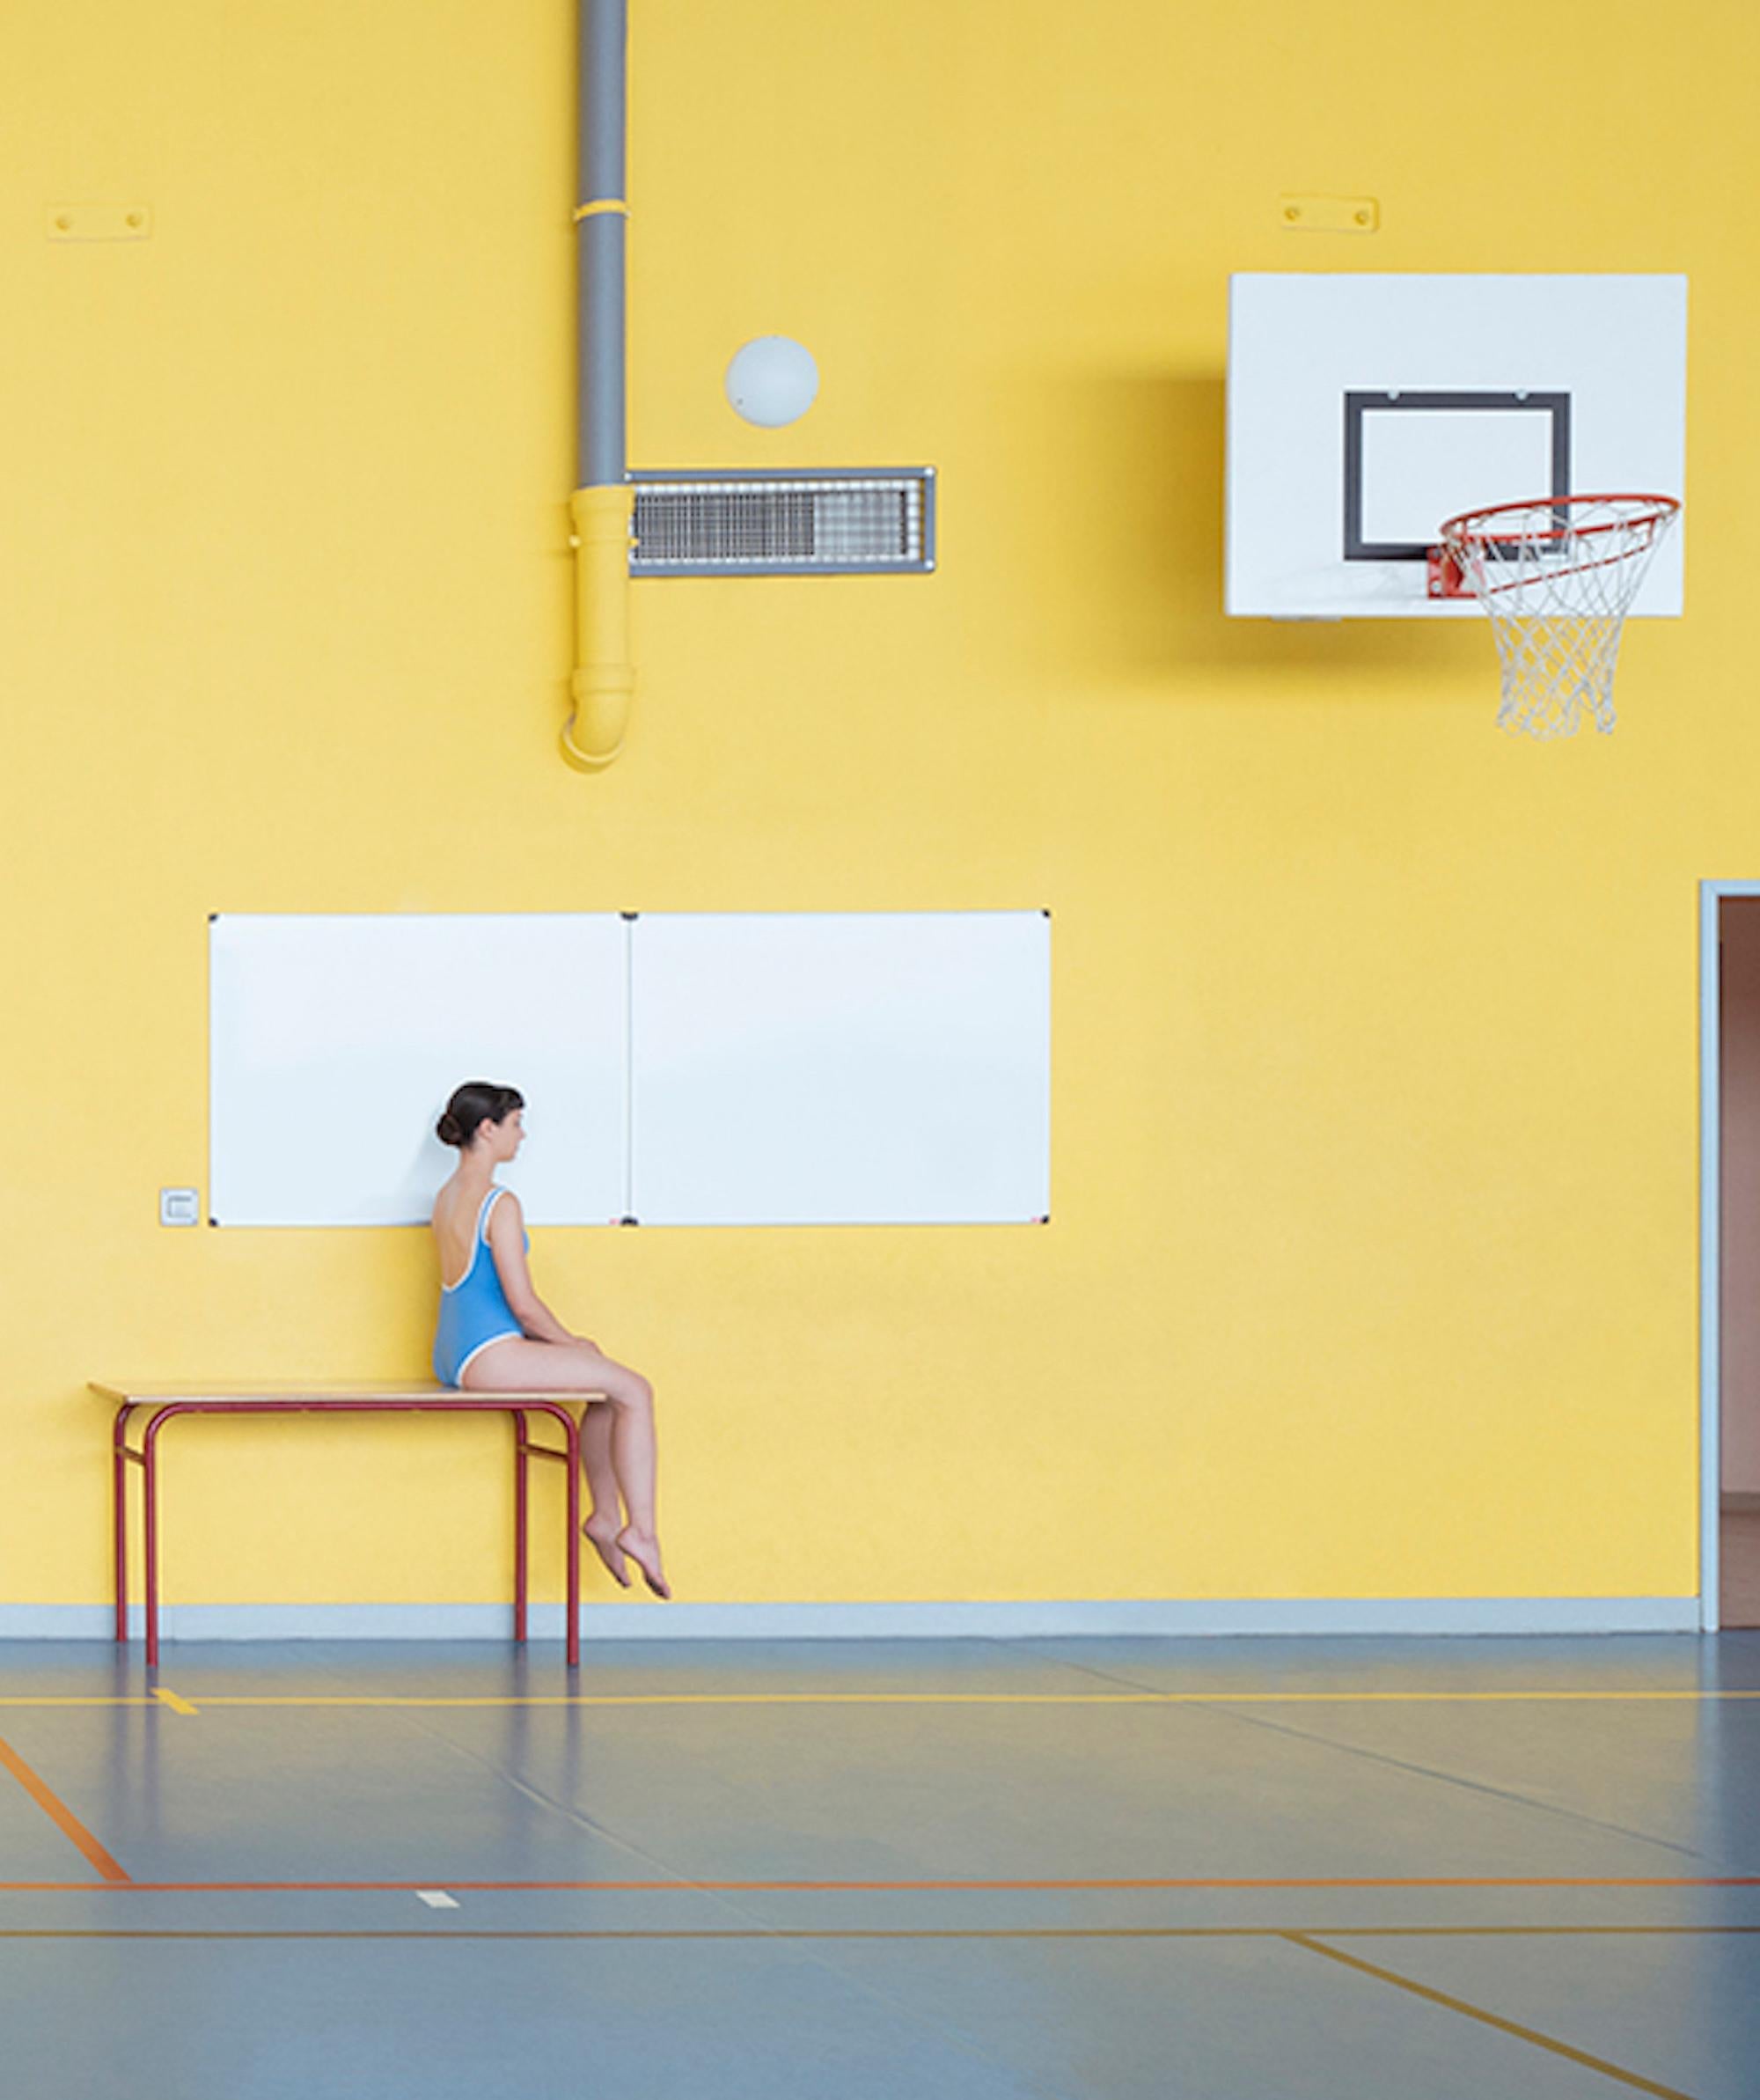 Alter n°4 by Camille Brasselet - Contemporary fine art photography, sport, gym For Sale 3